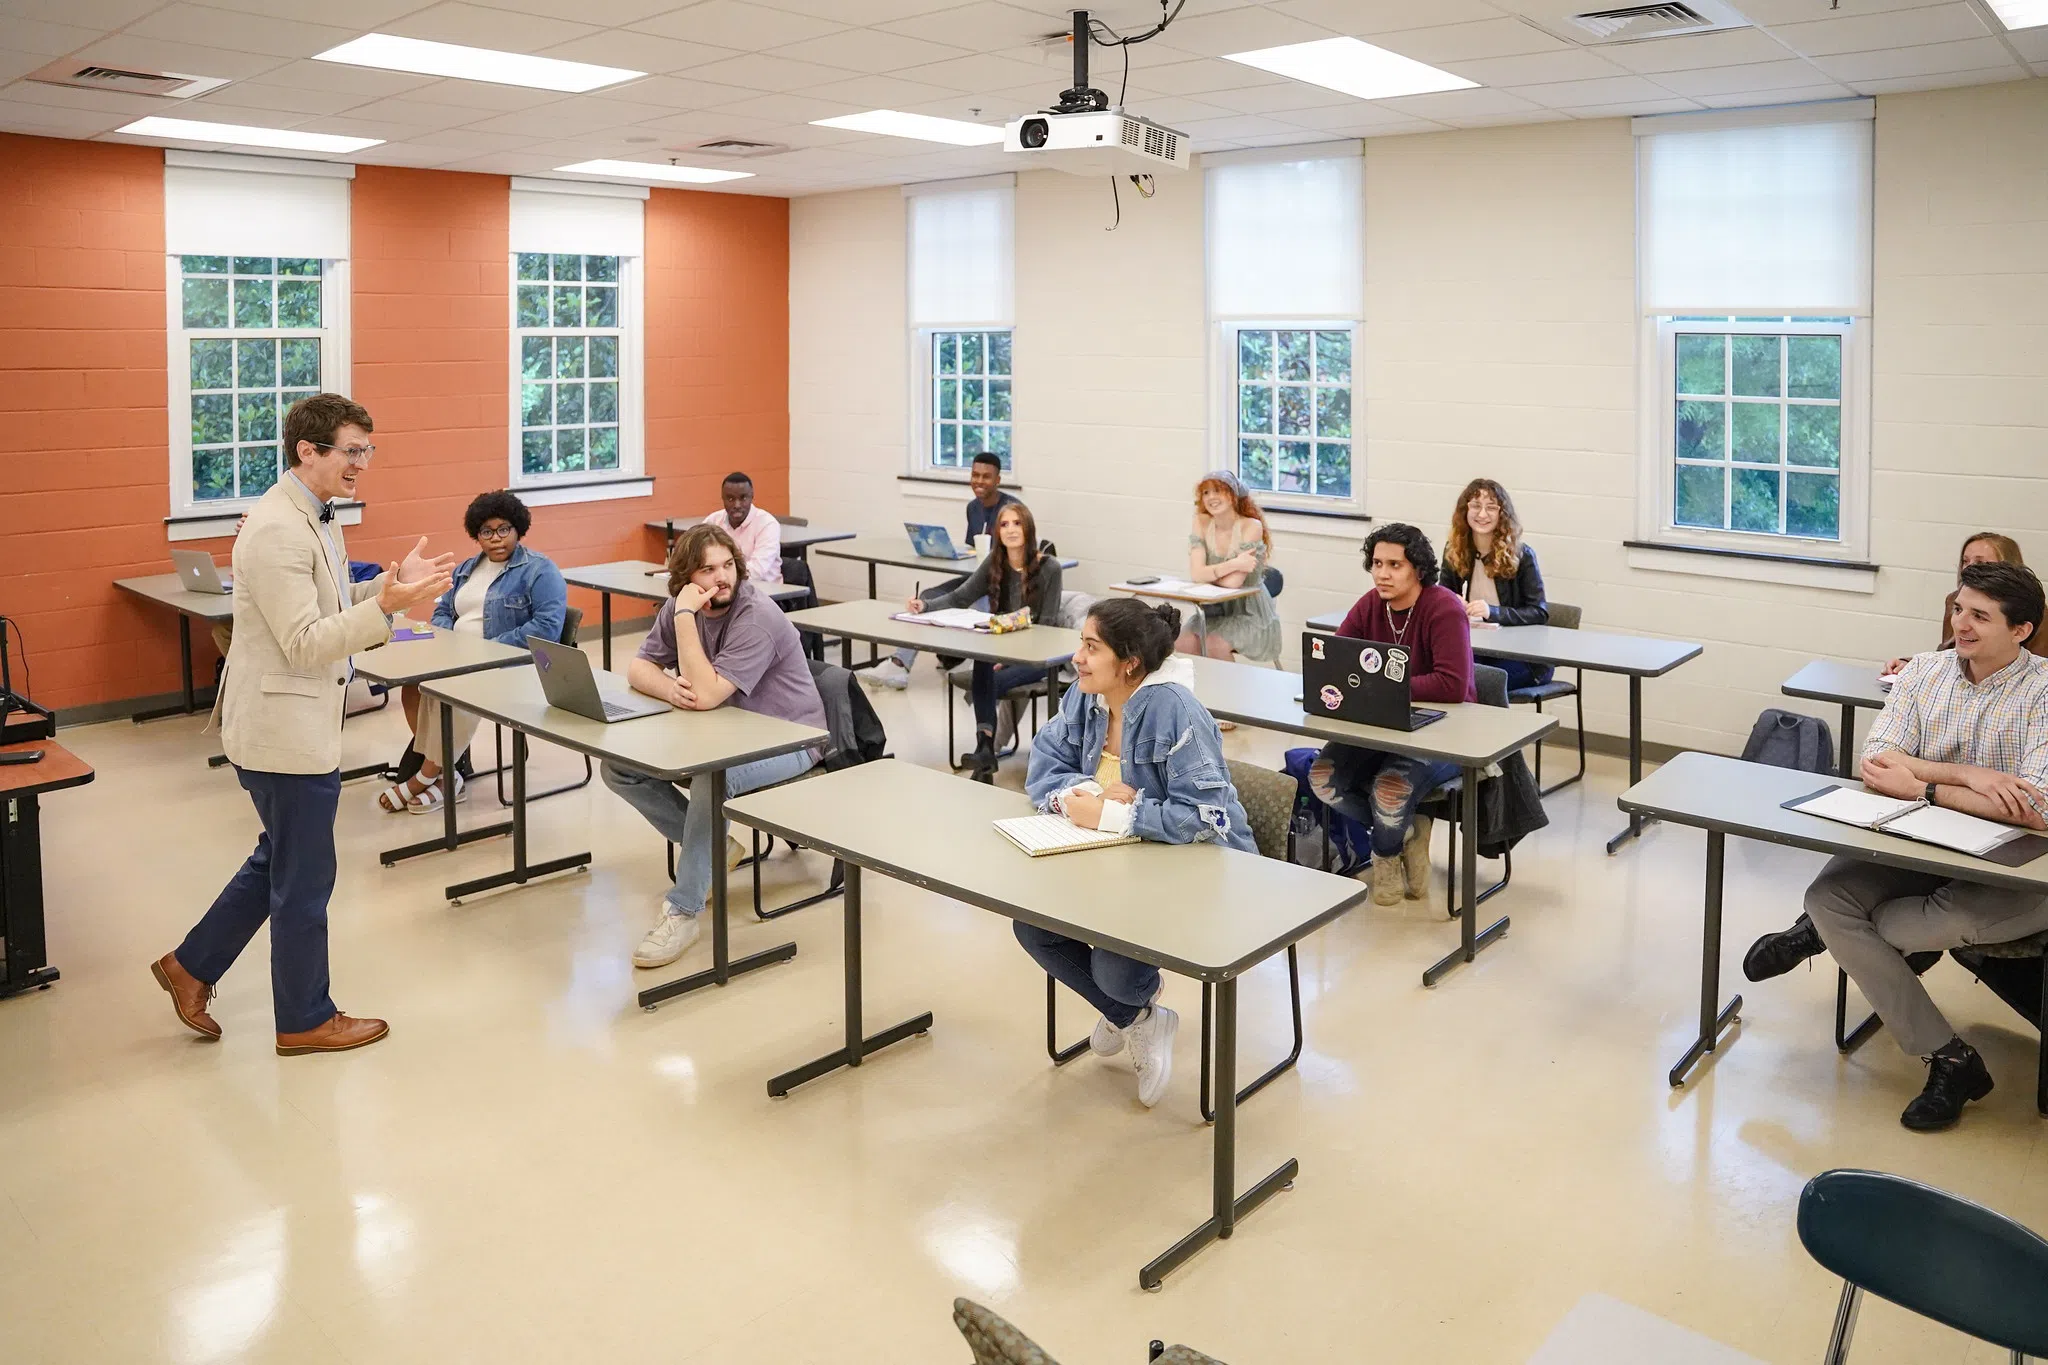 A professor on the left engages with three rows of students seated with computers out on tables.